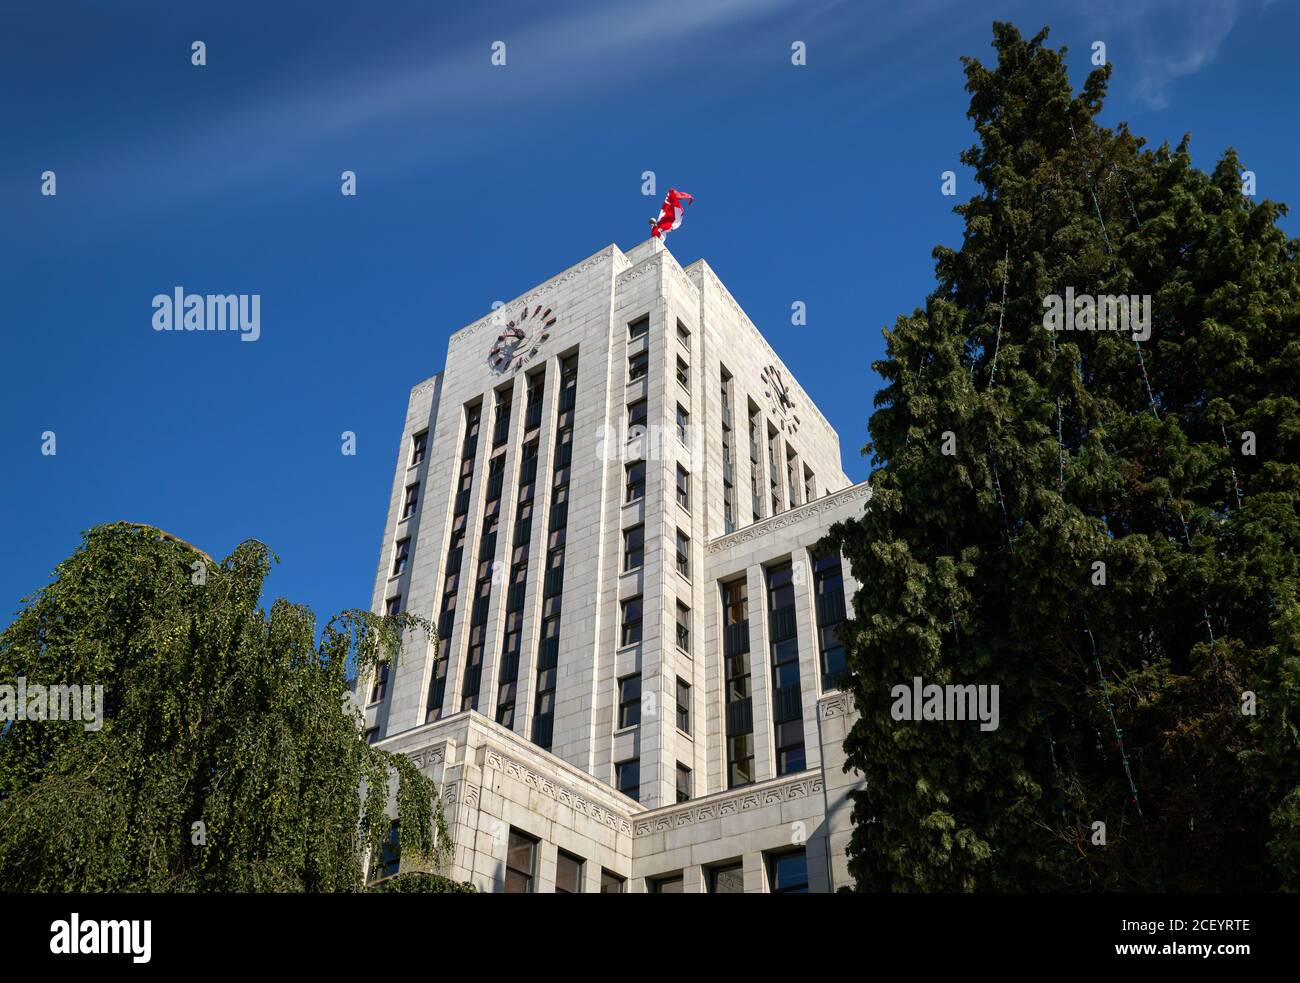 Vancouver City Hall Building. The exterior of the Vancouver City Hall building. British Columbia, Canada. Stock Photo